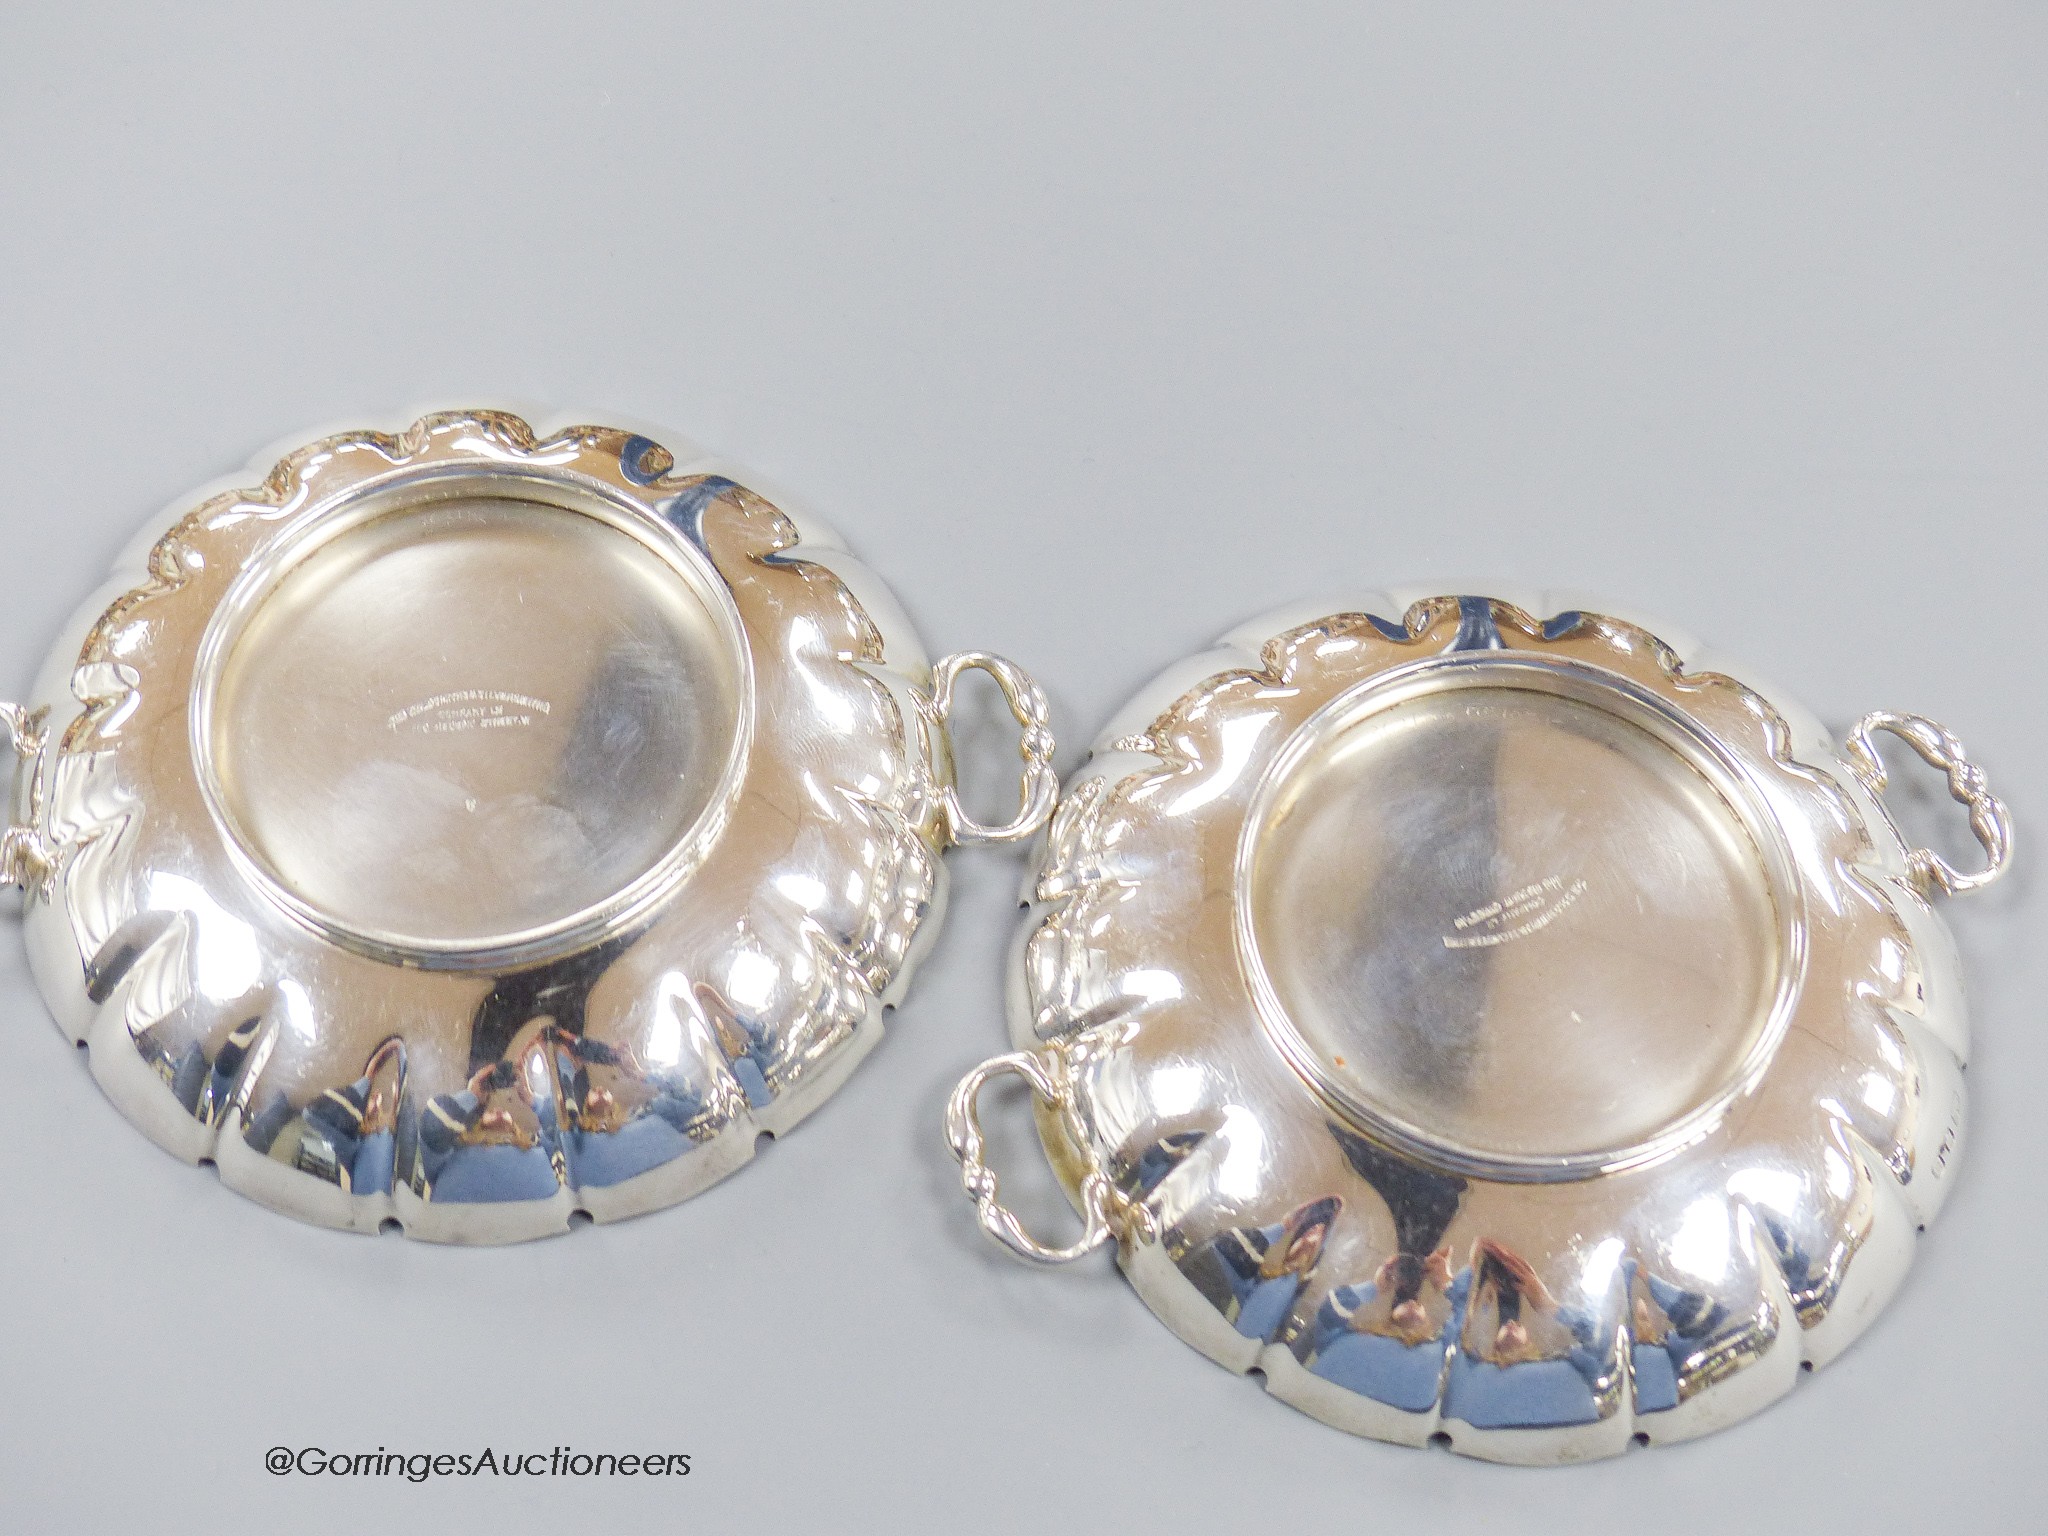 A pair of 1930's silver two handled shallow dishes, Goldsmiths & Silversmiths Co Ltd, London, 1937, 14.2cm, 8.5oz.